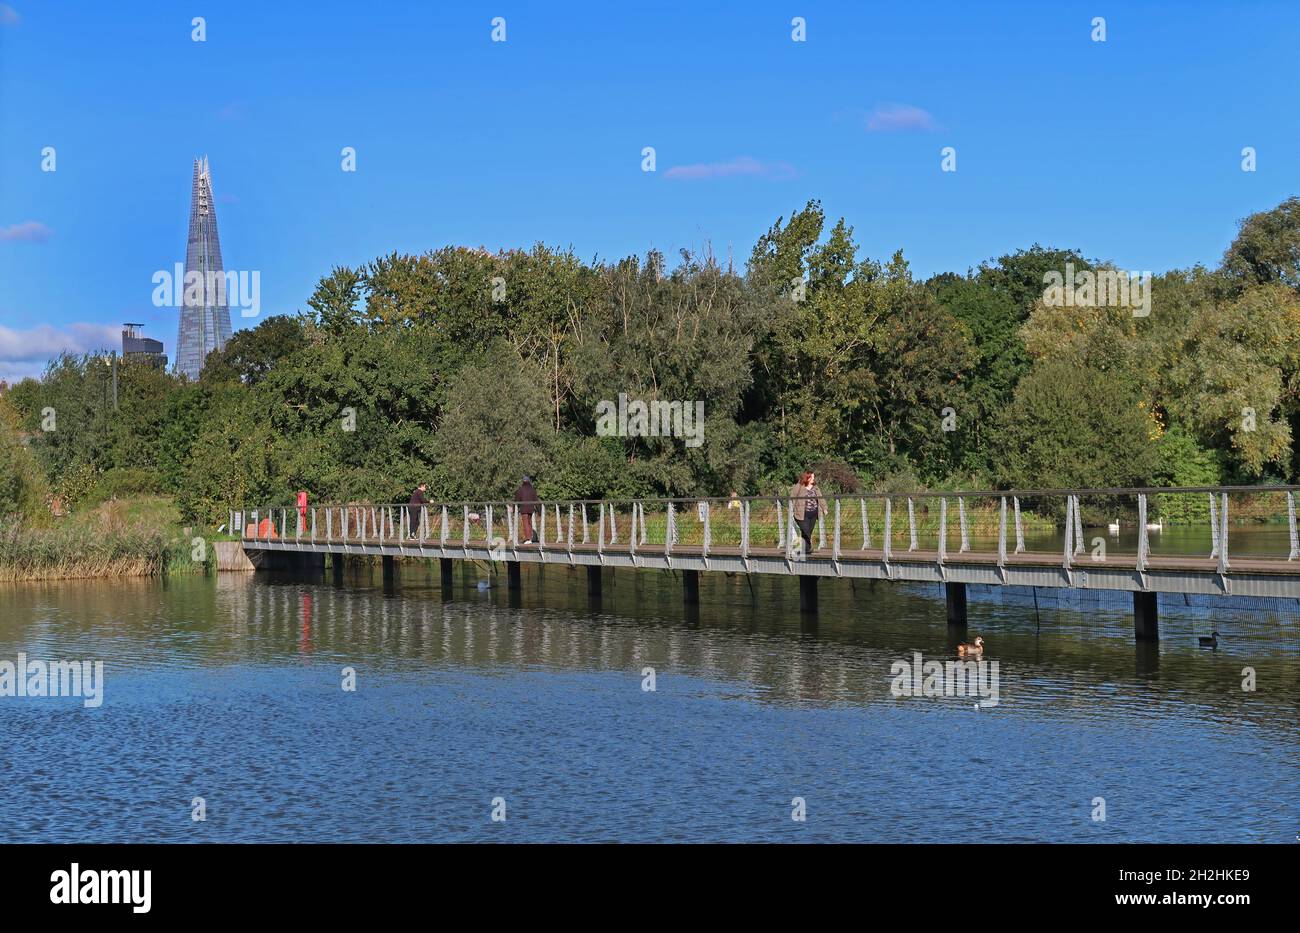 Footbridge across the lake in Burgess Park, a large public green space in the heart of Southwark, London, UK. Shows The Shard on the skyline. Stock Photo